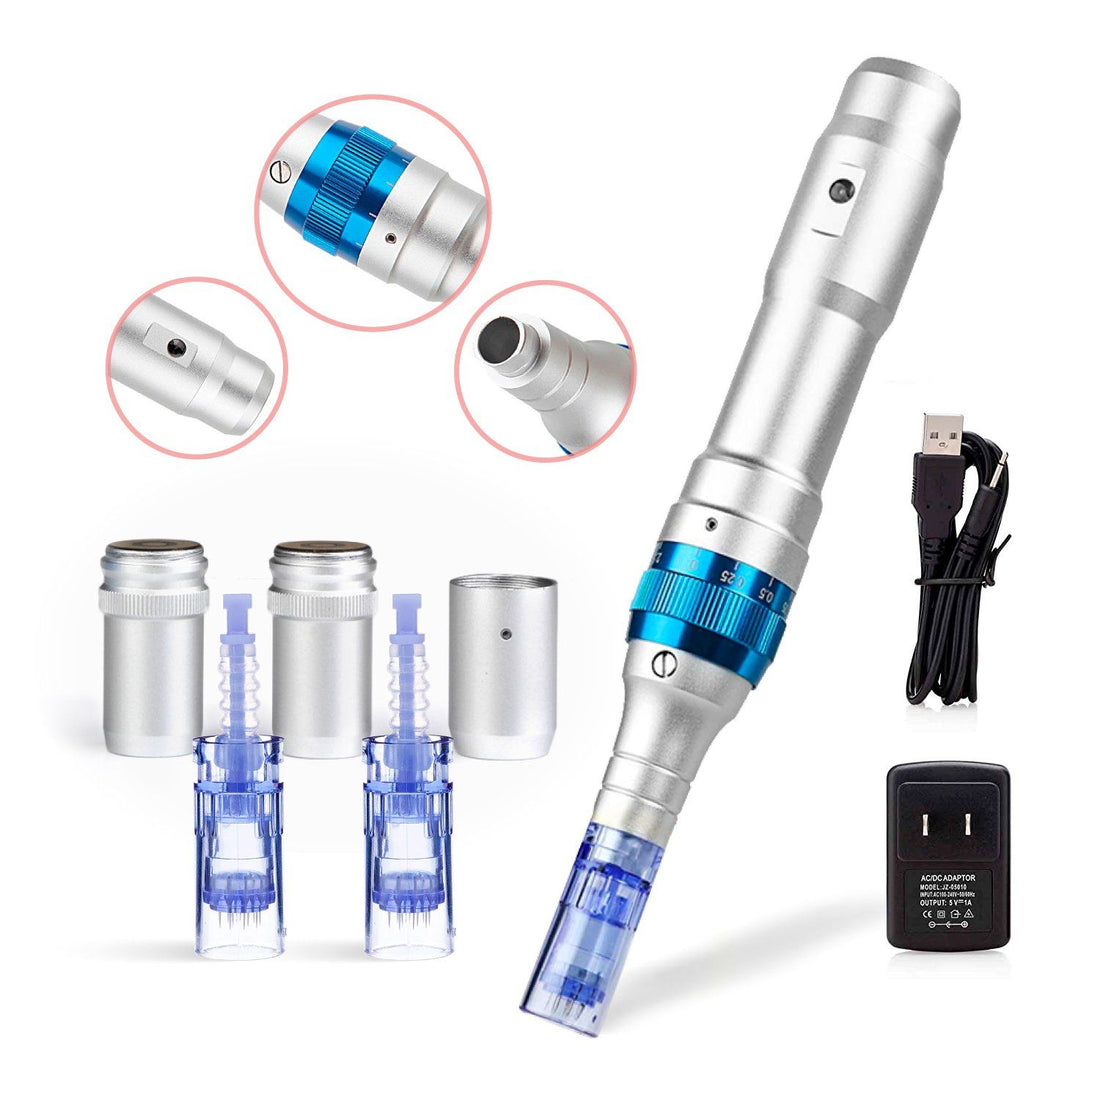 Dr. Pen Ultima A6 - Microneedling Electric Wireless Professional Skincare Kit with Cartridges - 2 X 12 pins (Maximum length of Needles 0.25mm) SH-Dr pen - A6 Avery Rose Beauty 